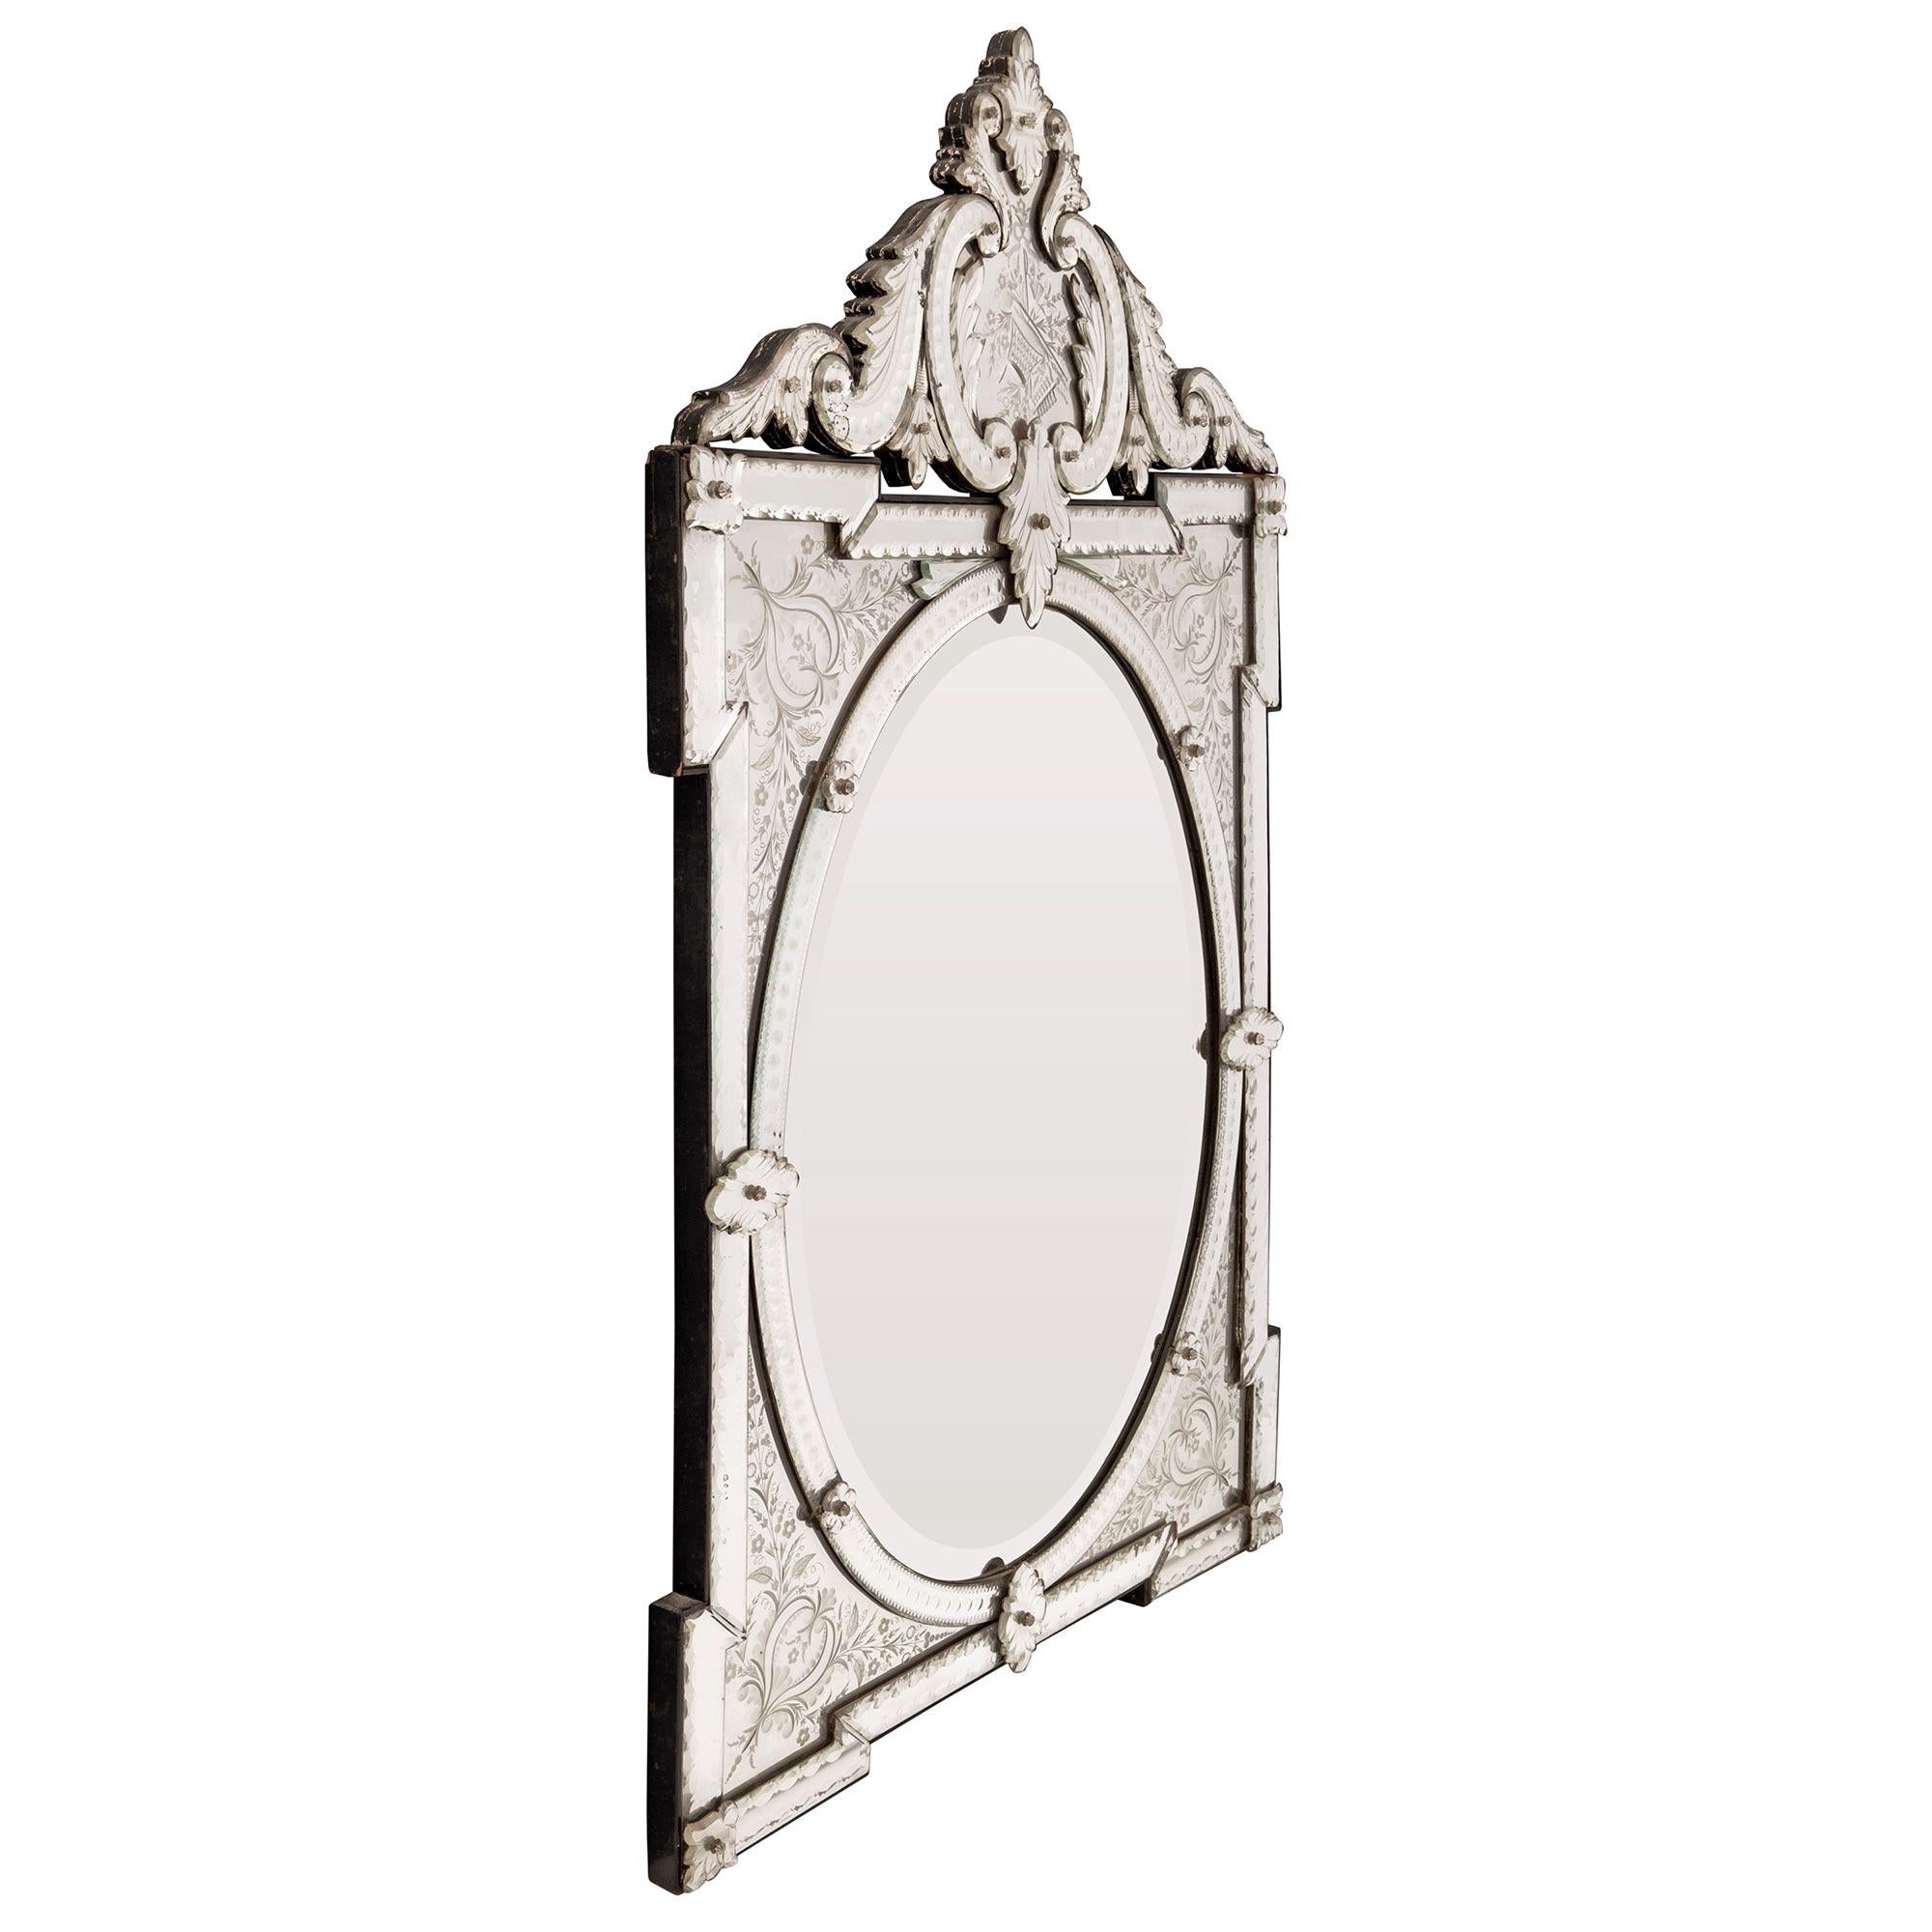 A beautiful and extremely decorative Italian 19th century Venetian st. mirror. The mirror retains all of its original mirror plates throughout with the central oval mirror displaying an elegant beveled border framed within a lovely etched beaded